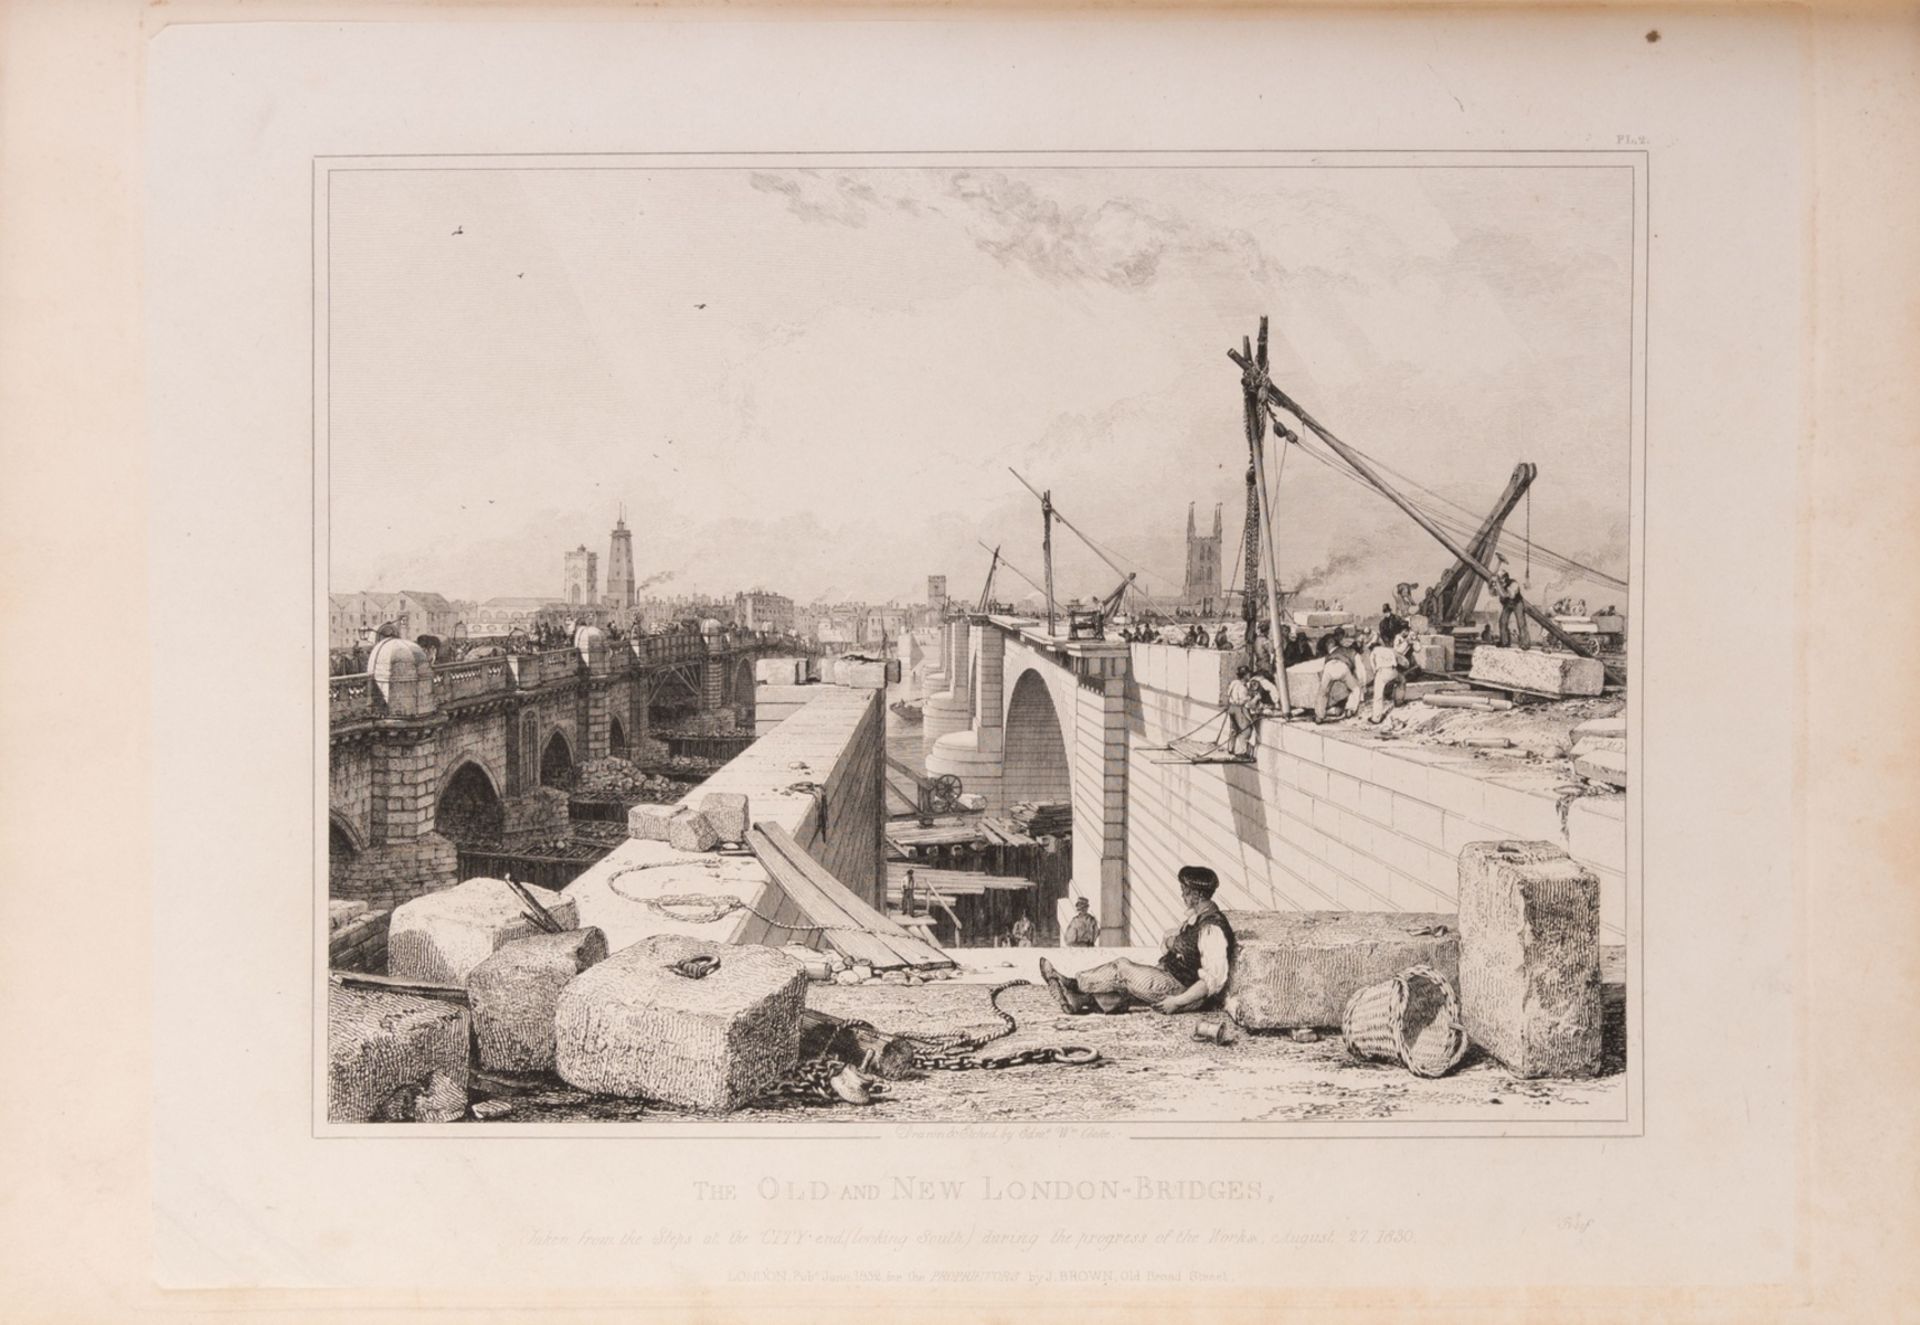 Cooke (Edward William) & George Rennie. Views of the Old and New London Bridges, first edition, 12 …